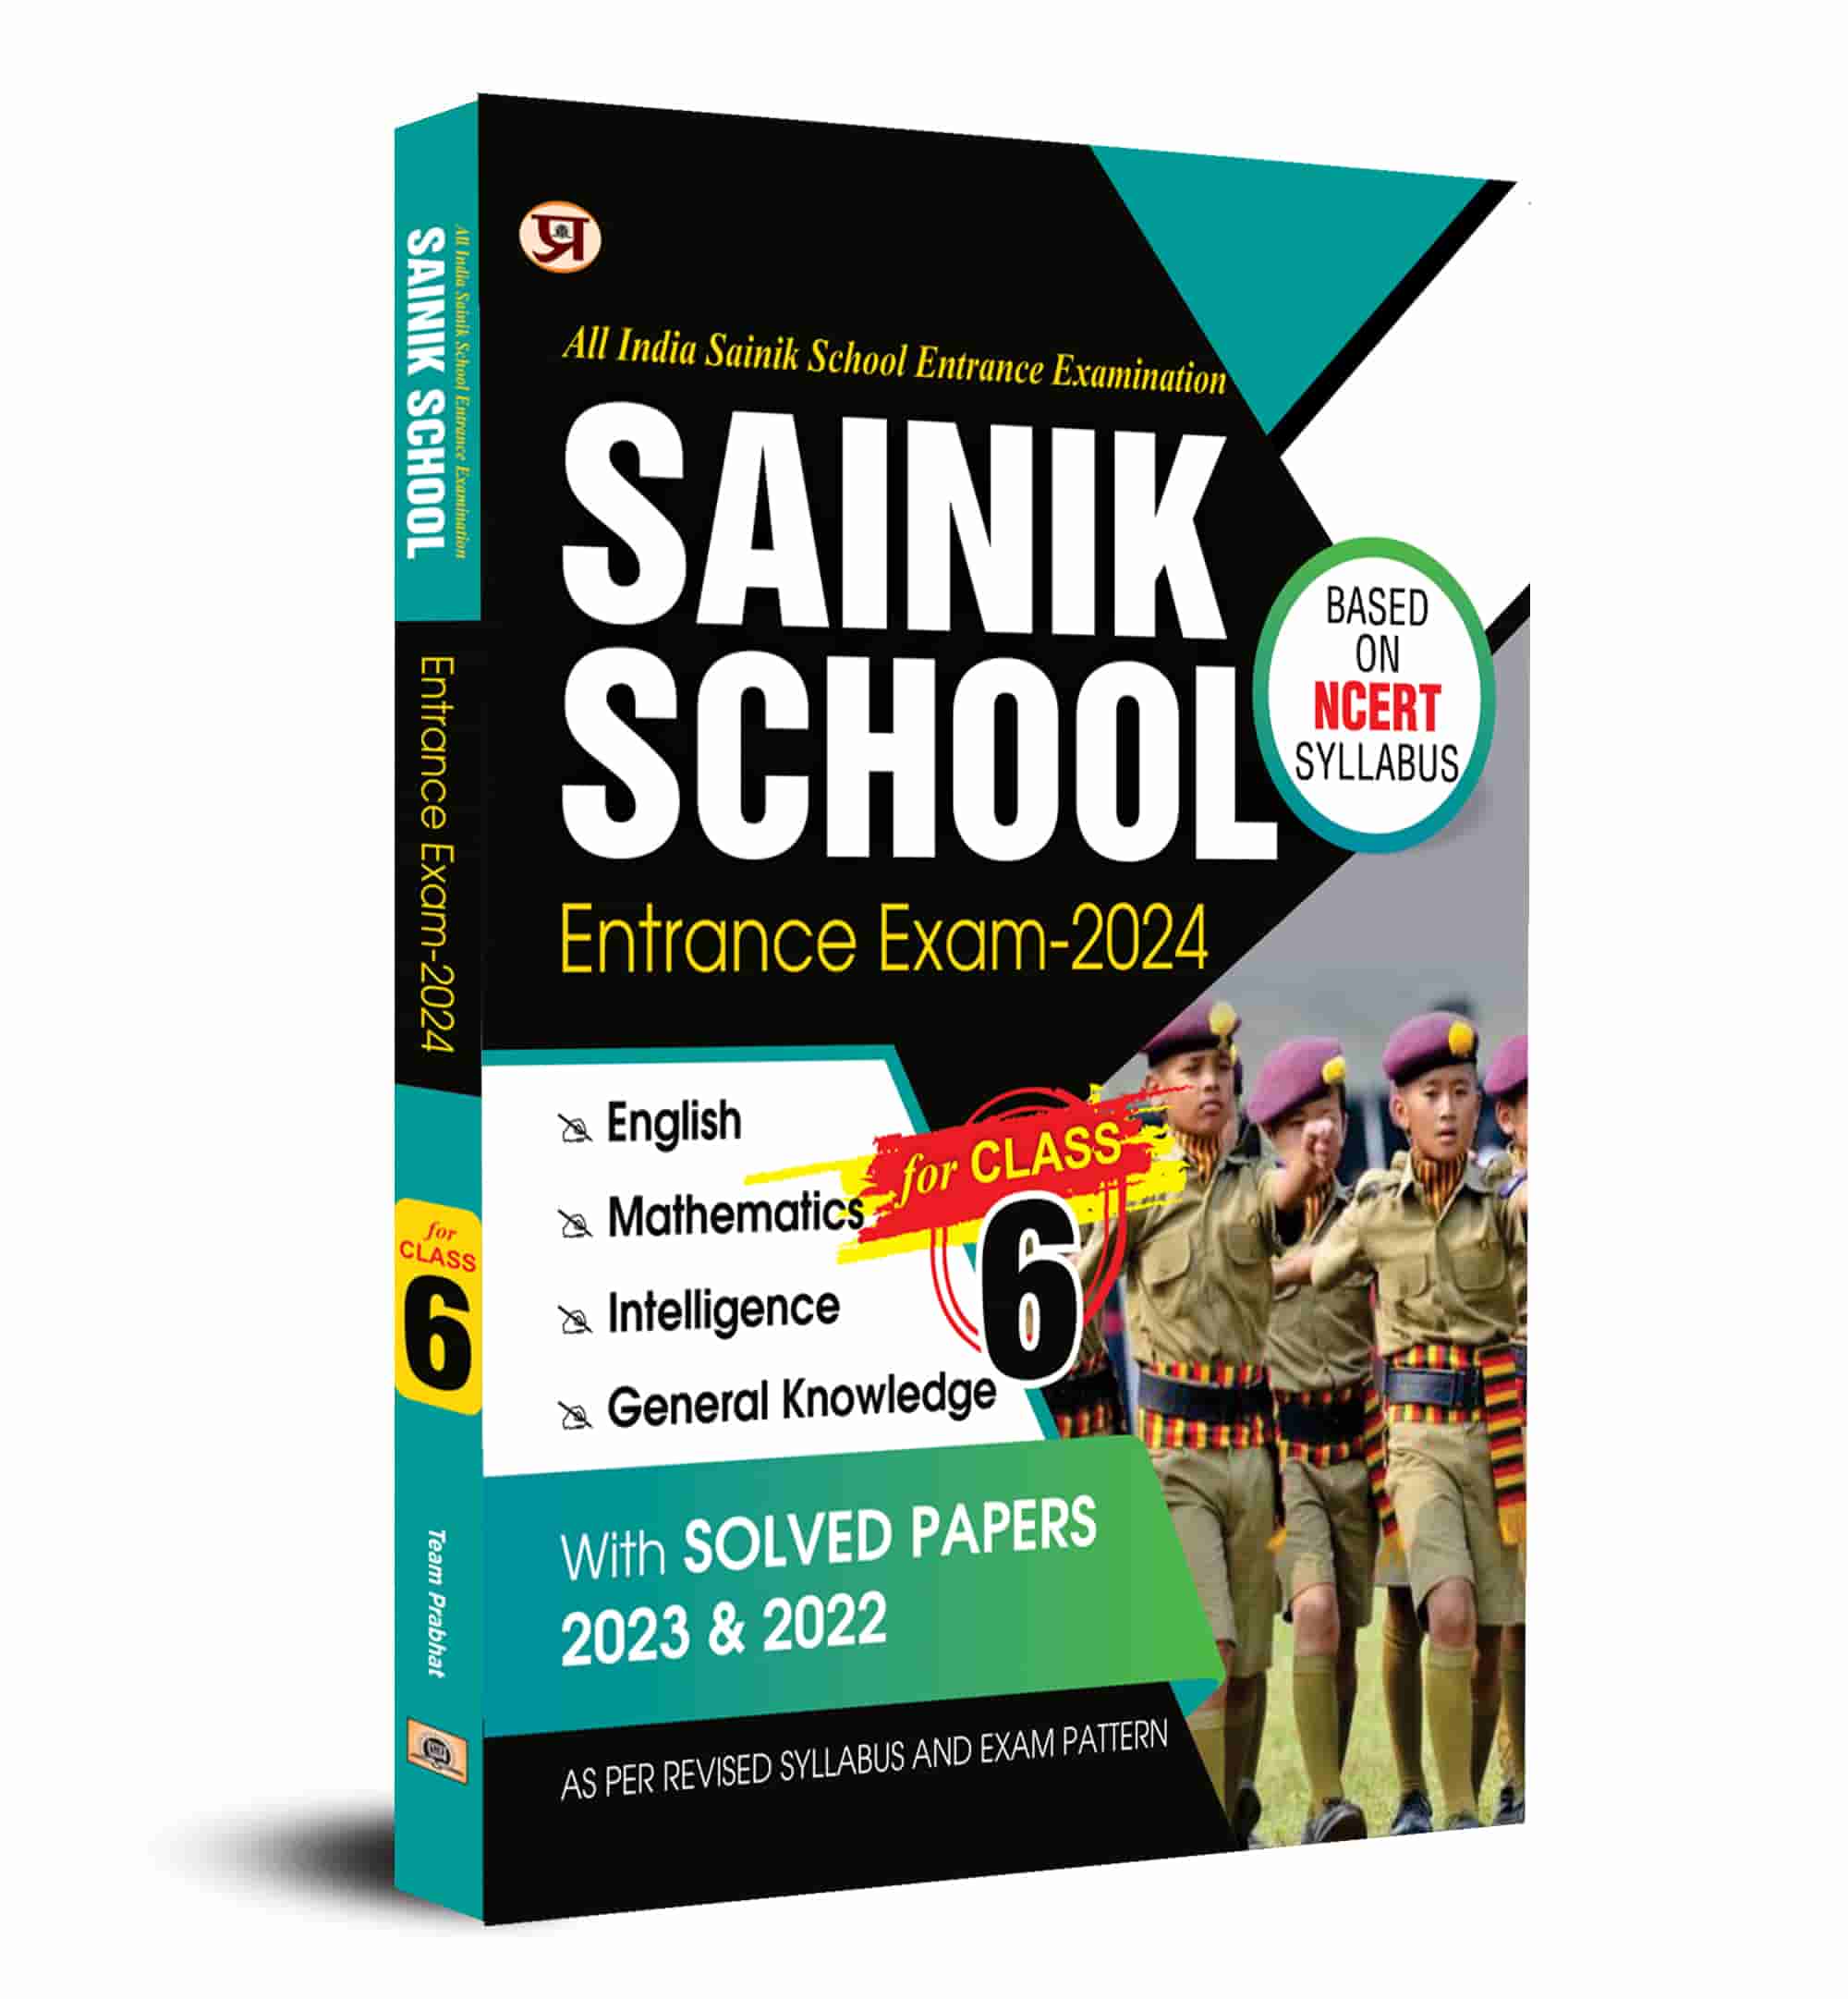 All India Sainik School Entrance Exam-2024 Study Guide with Solved Papers For Class 6 (Book in English)